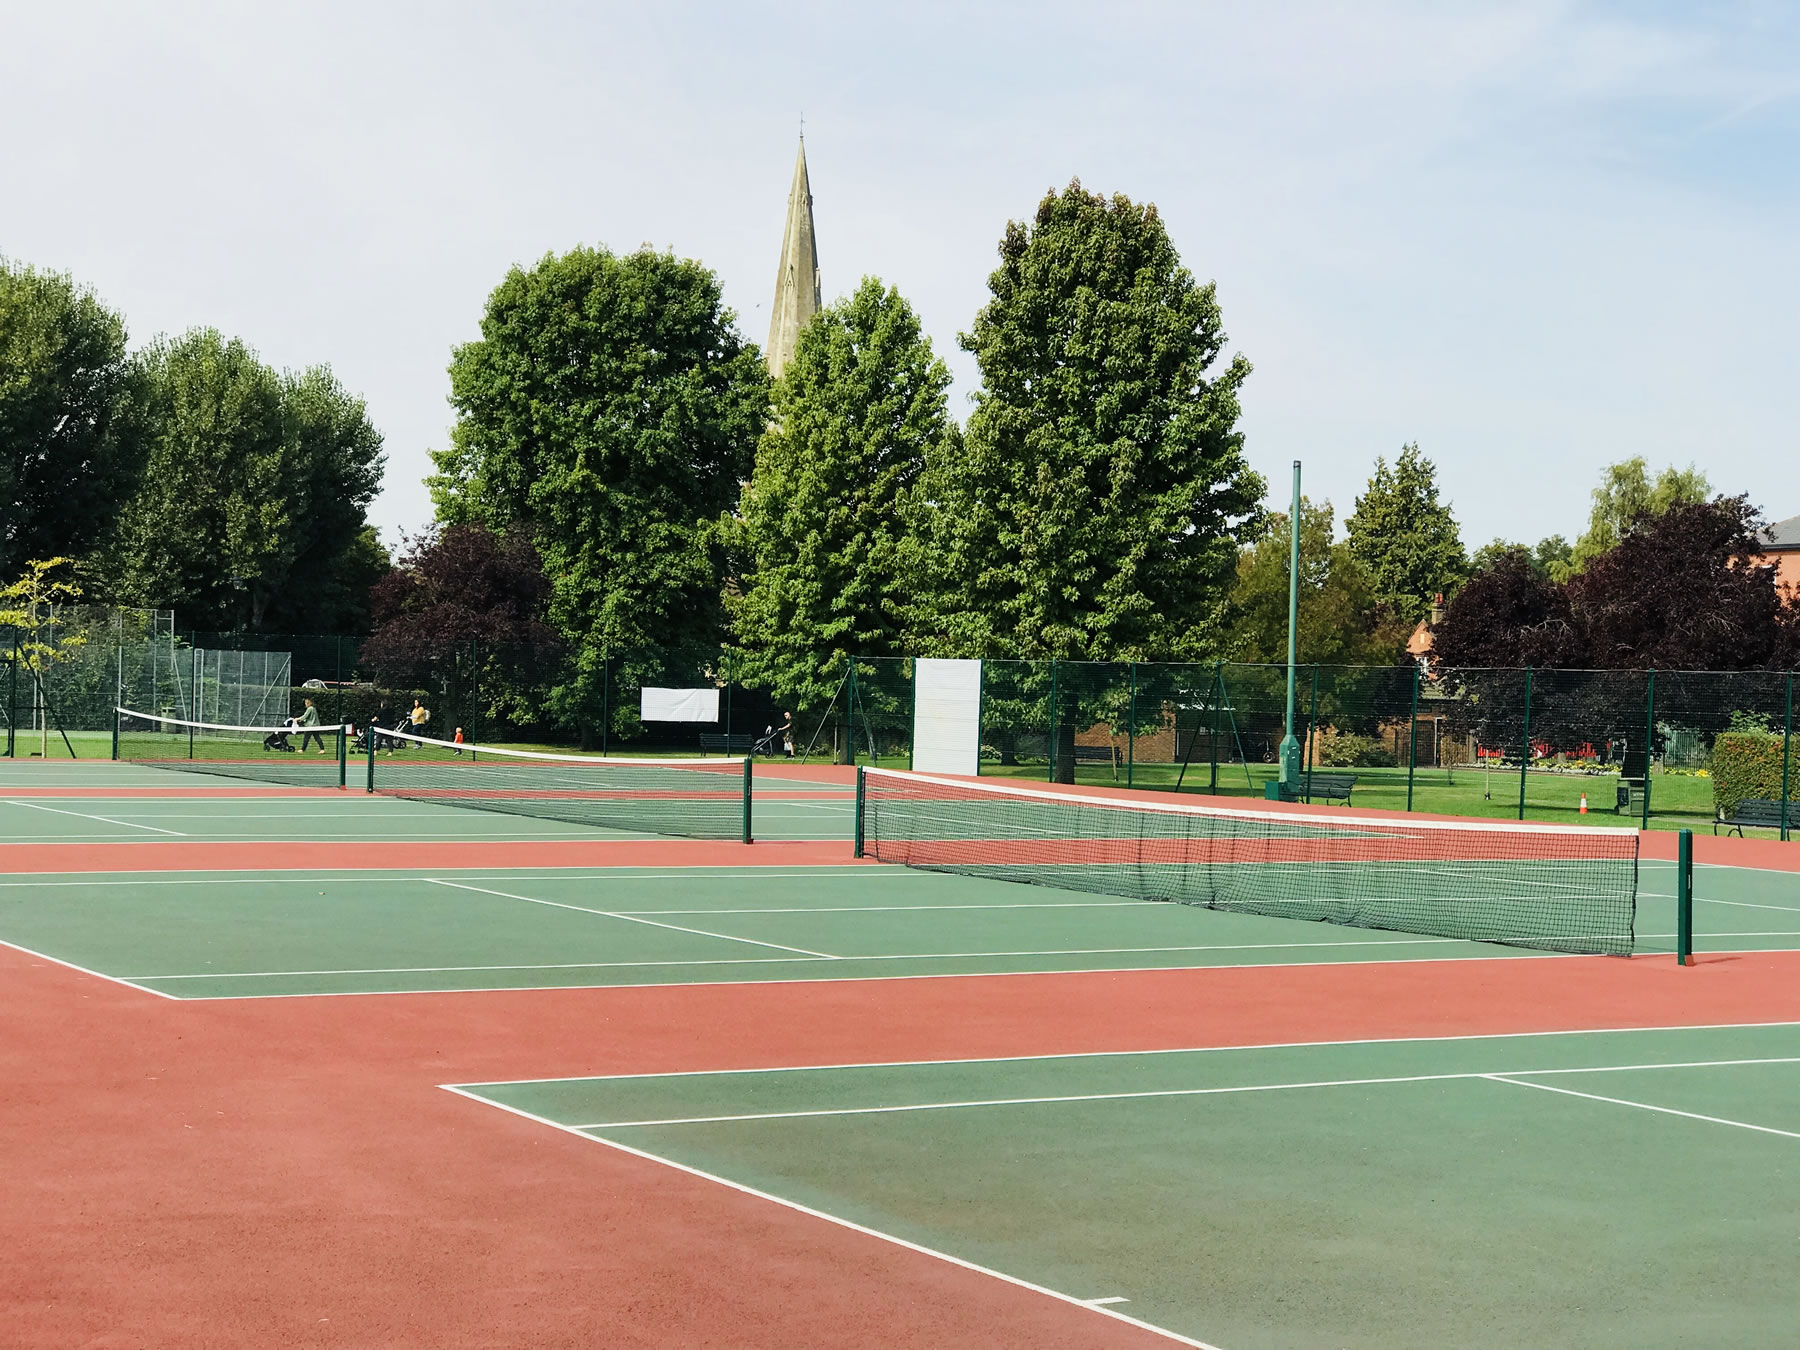 Tennis lessons in Weybridge for children 4 years and older